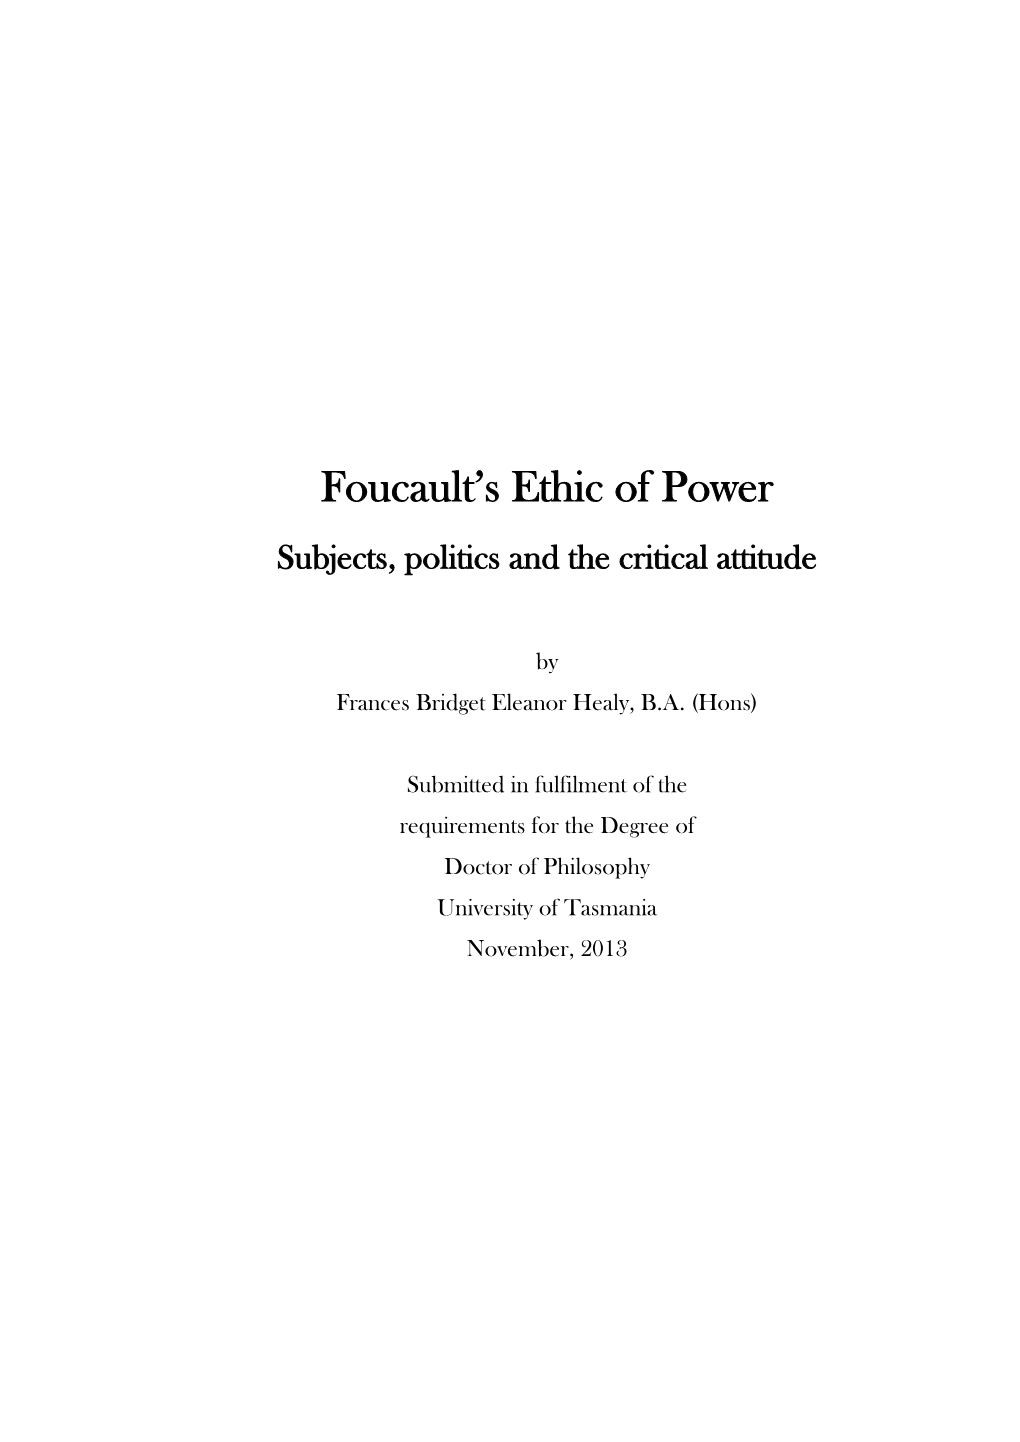 Foucault's Ethic of Power: Subjects, Politics and the Critical Attitude